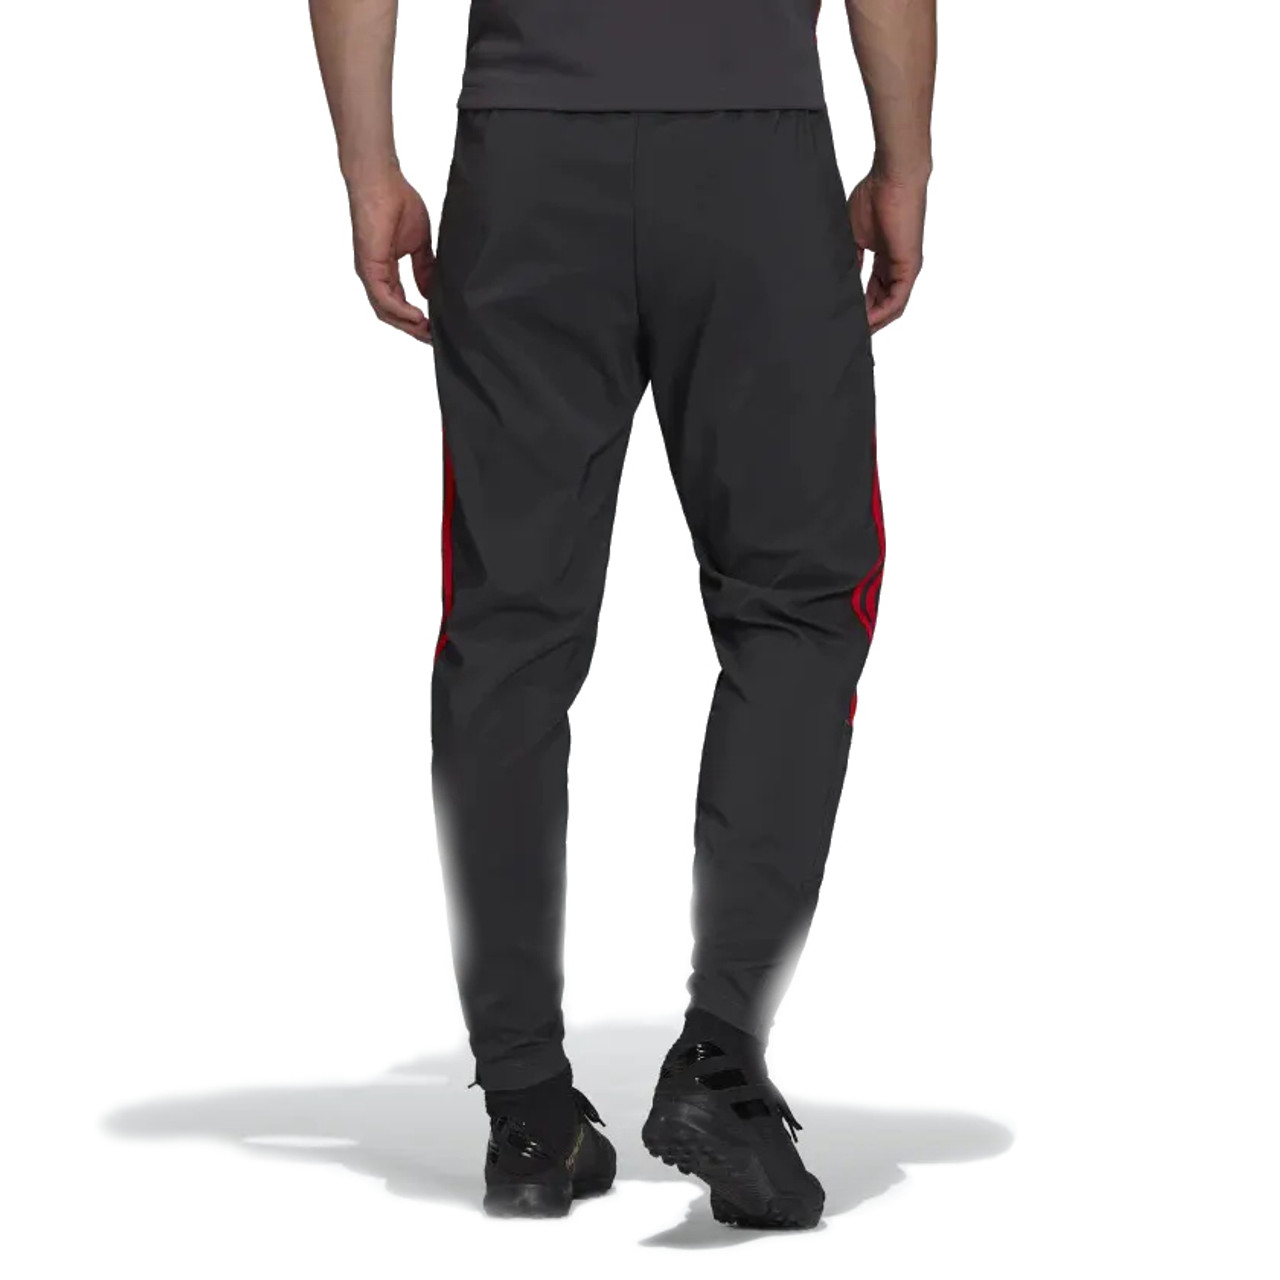 Adidas River Plate Street Pants - Official Product (various available) - Pampa Direct